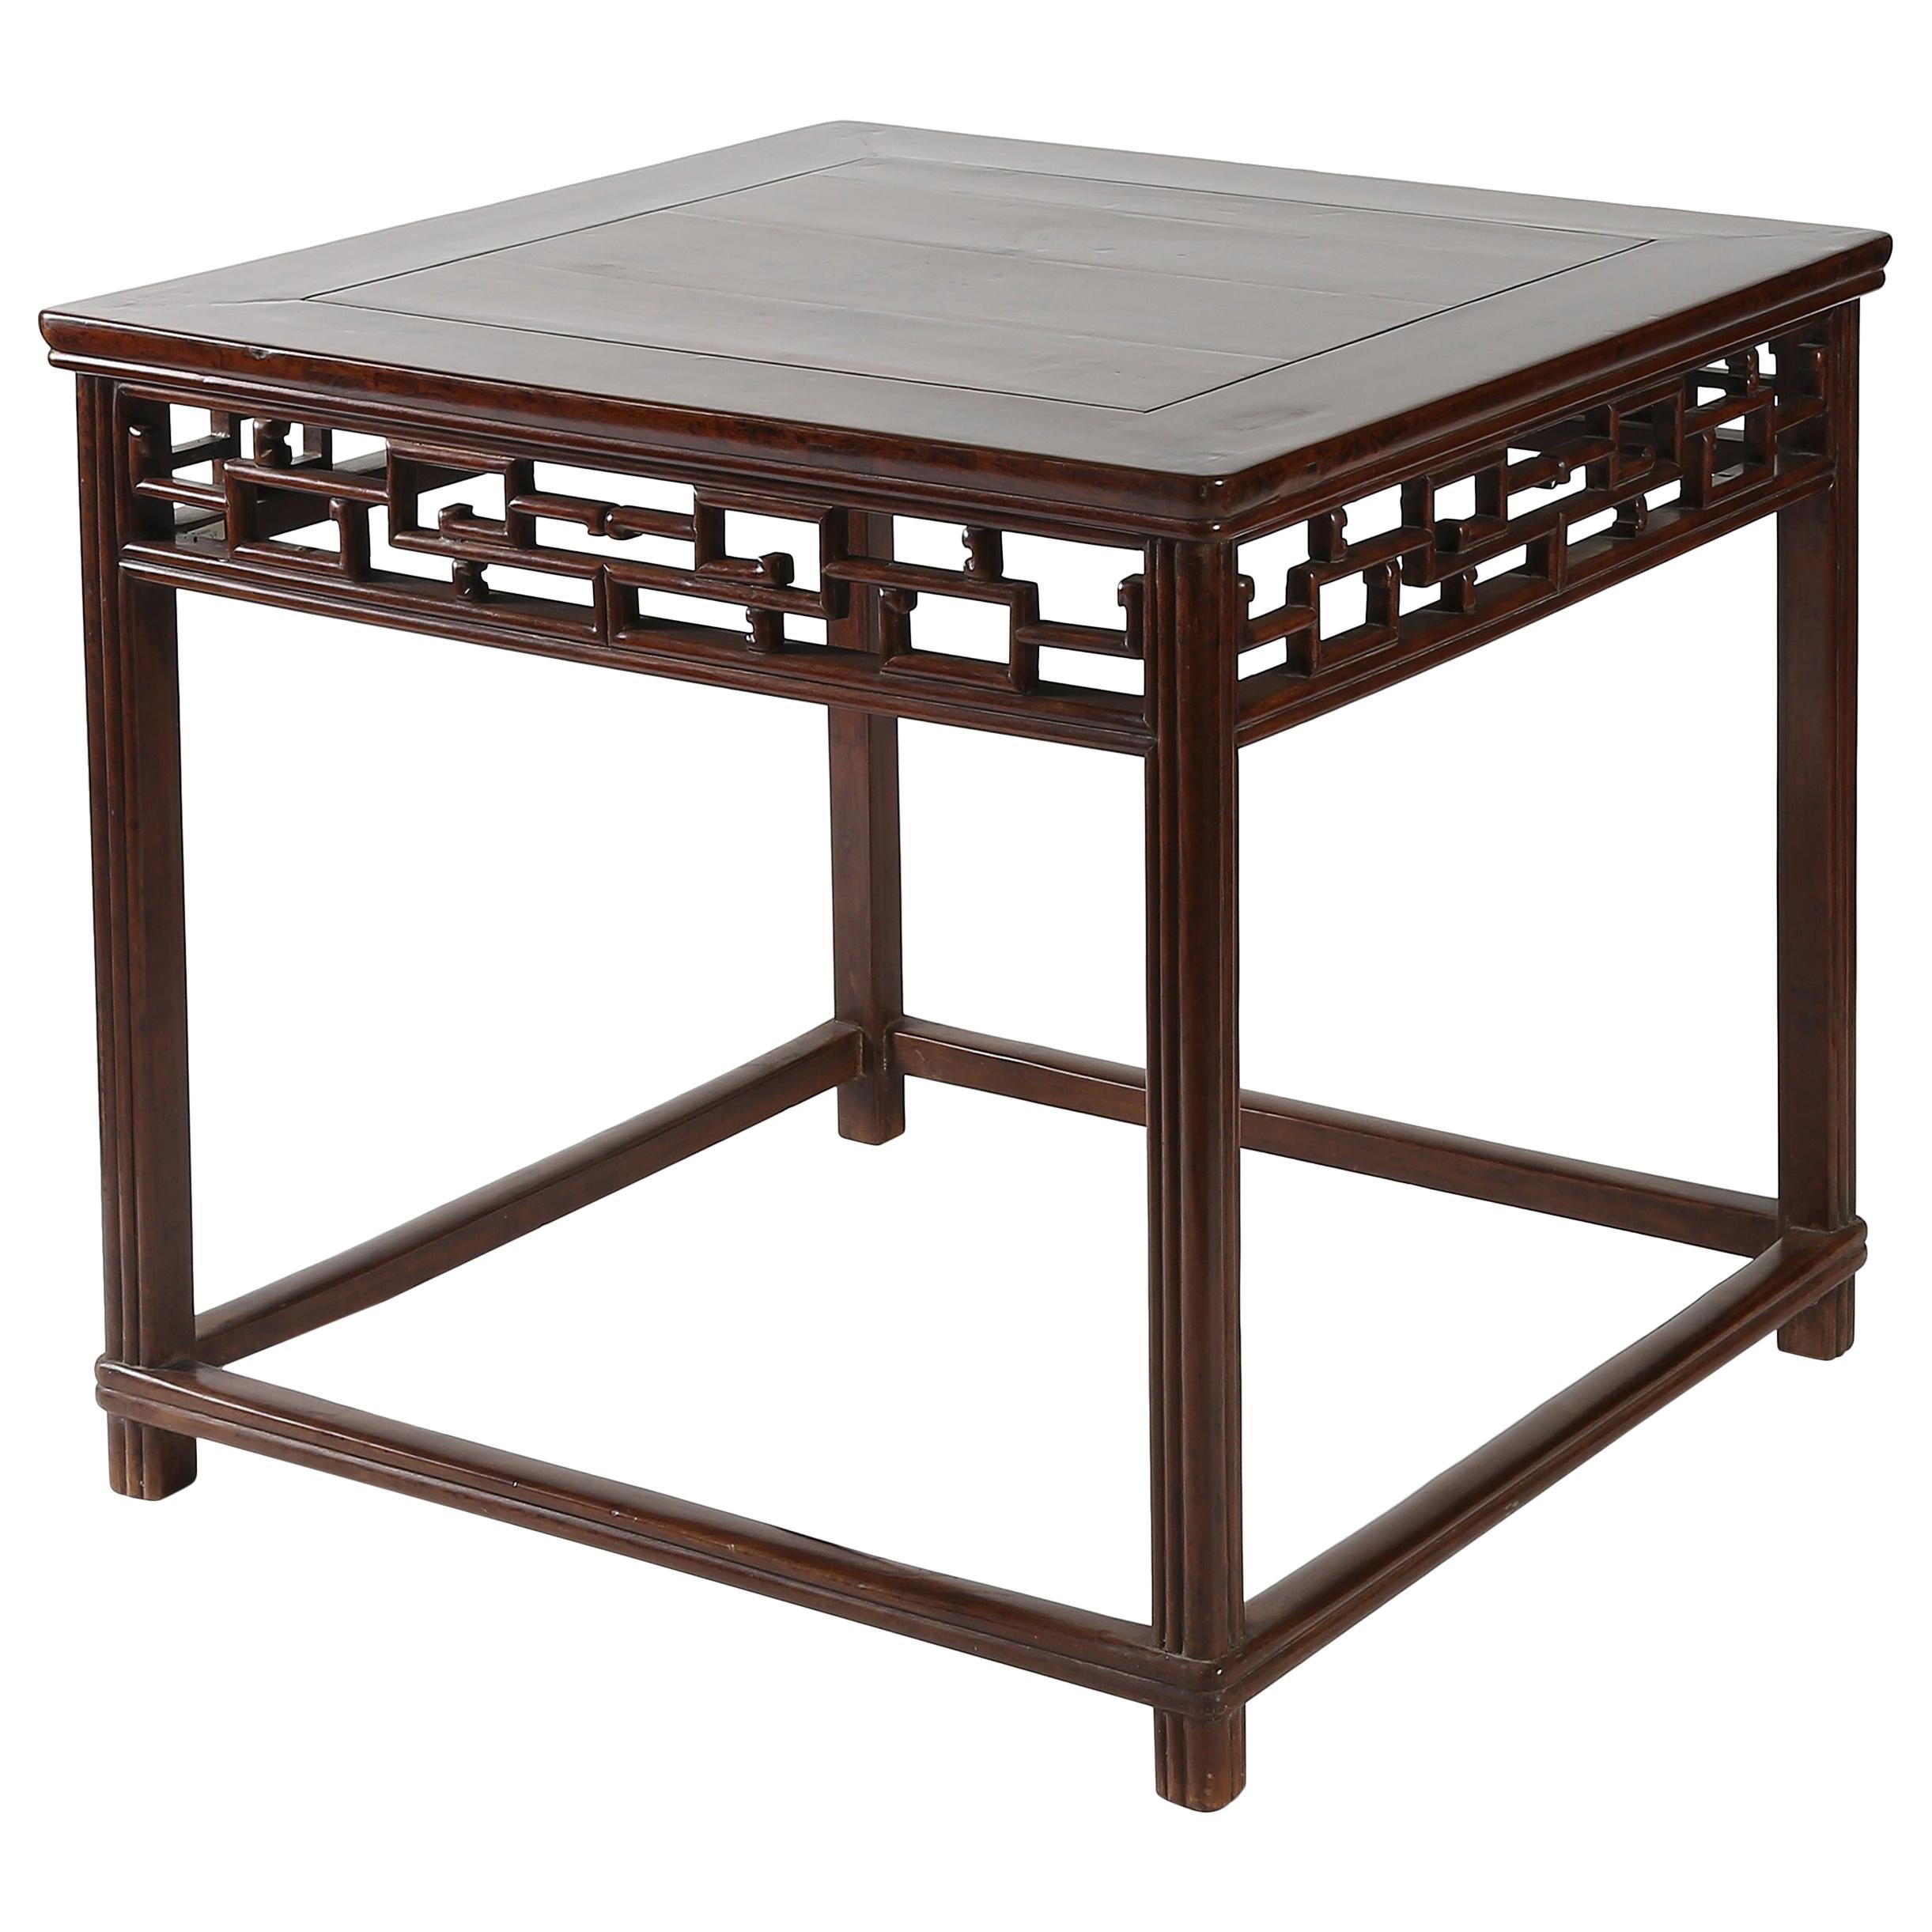 Antique Chinoiserie Walnut Square Display Table with Fretwork Aprons, c. 1800’s